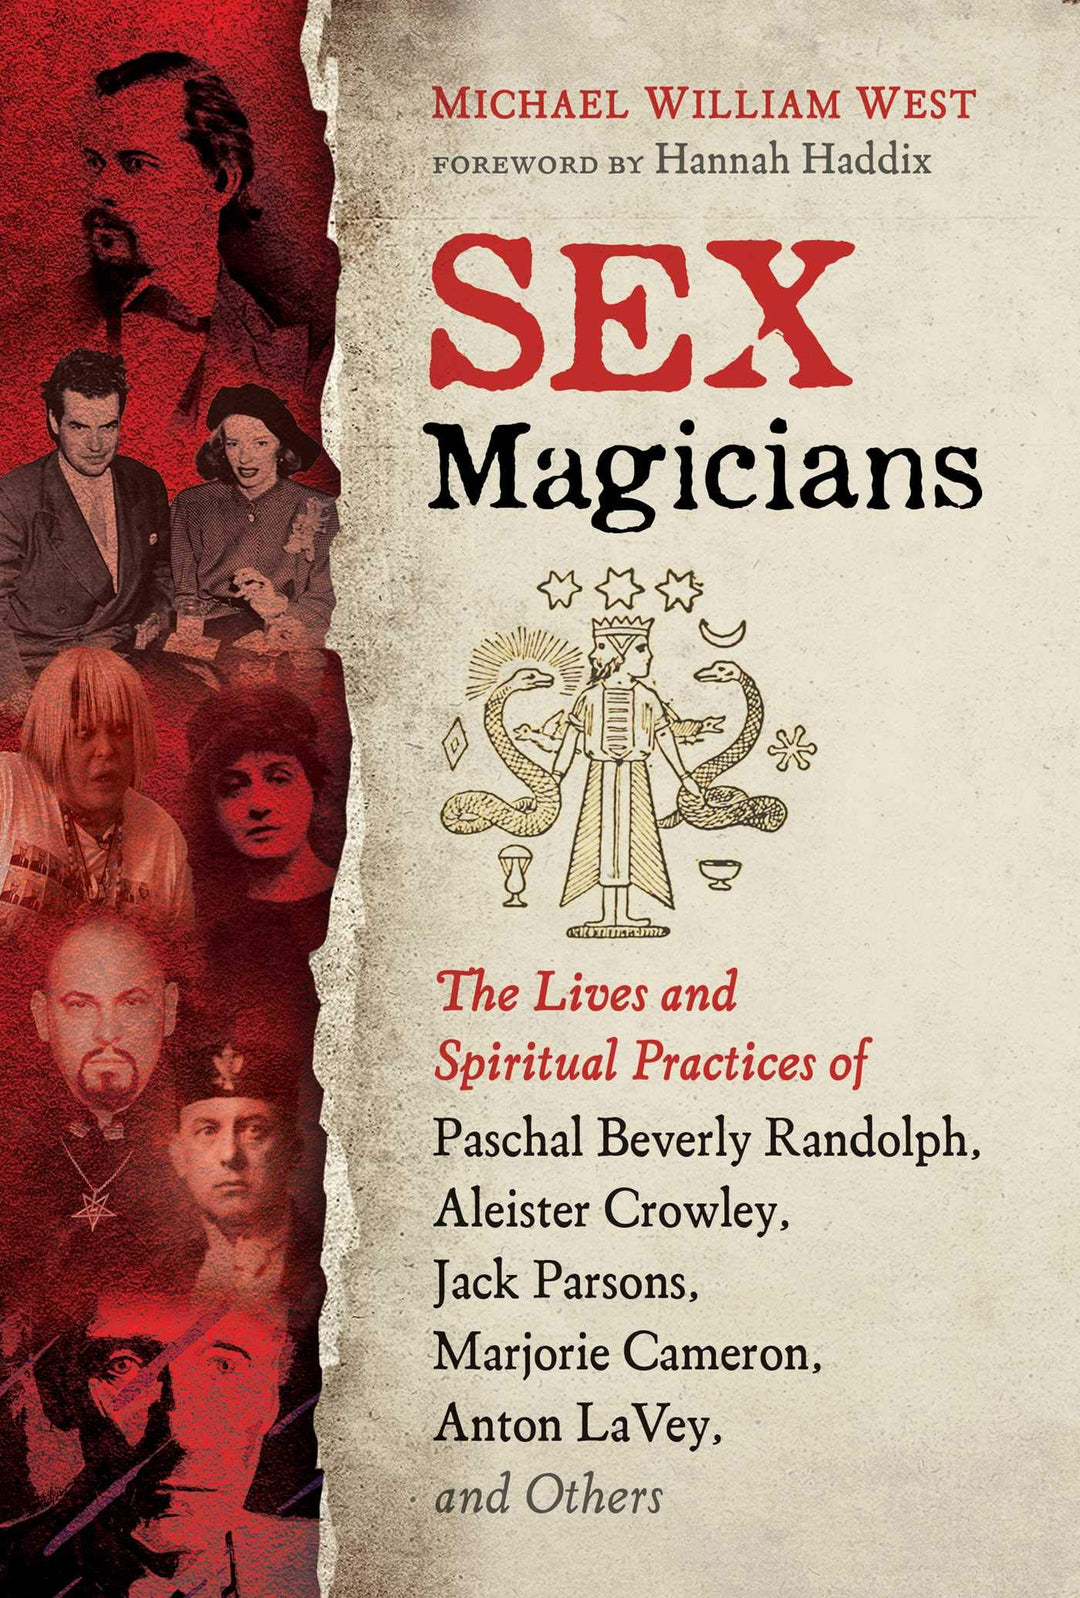 Sex Magicians: The Lives and Spiritual Practices of Paschal Beverly Randolph, Aleister Crowley, and Others by Michael William West